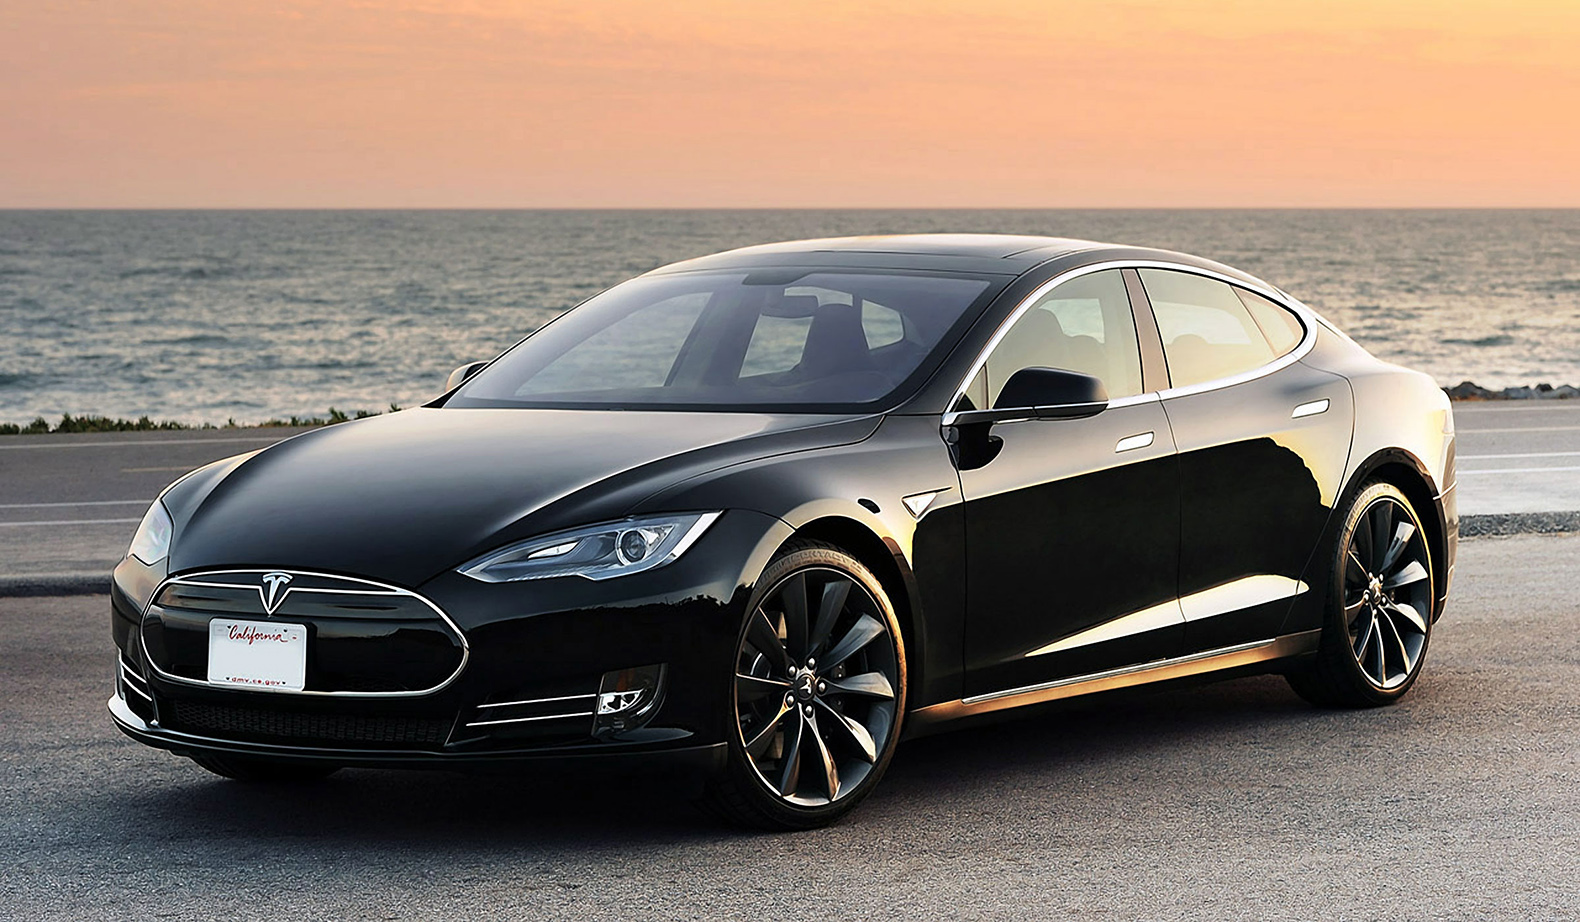 Amazing Tesla Pictures & Backgrounds - Teslo Car - HD Wallpaper 